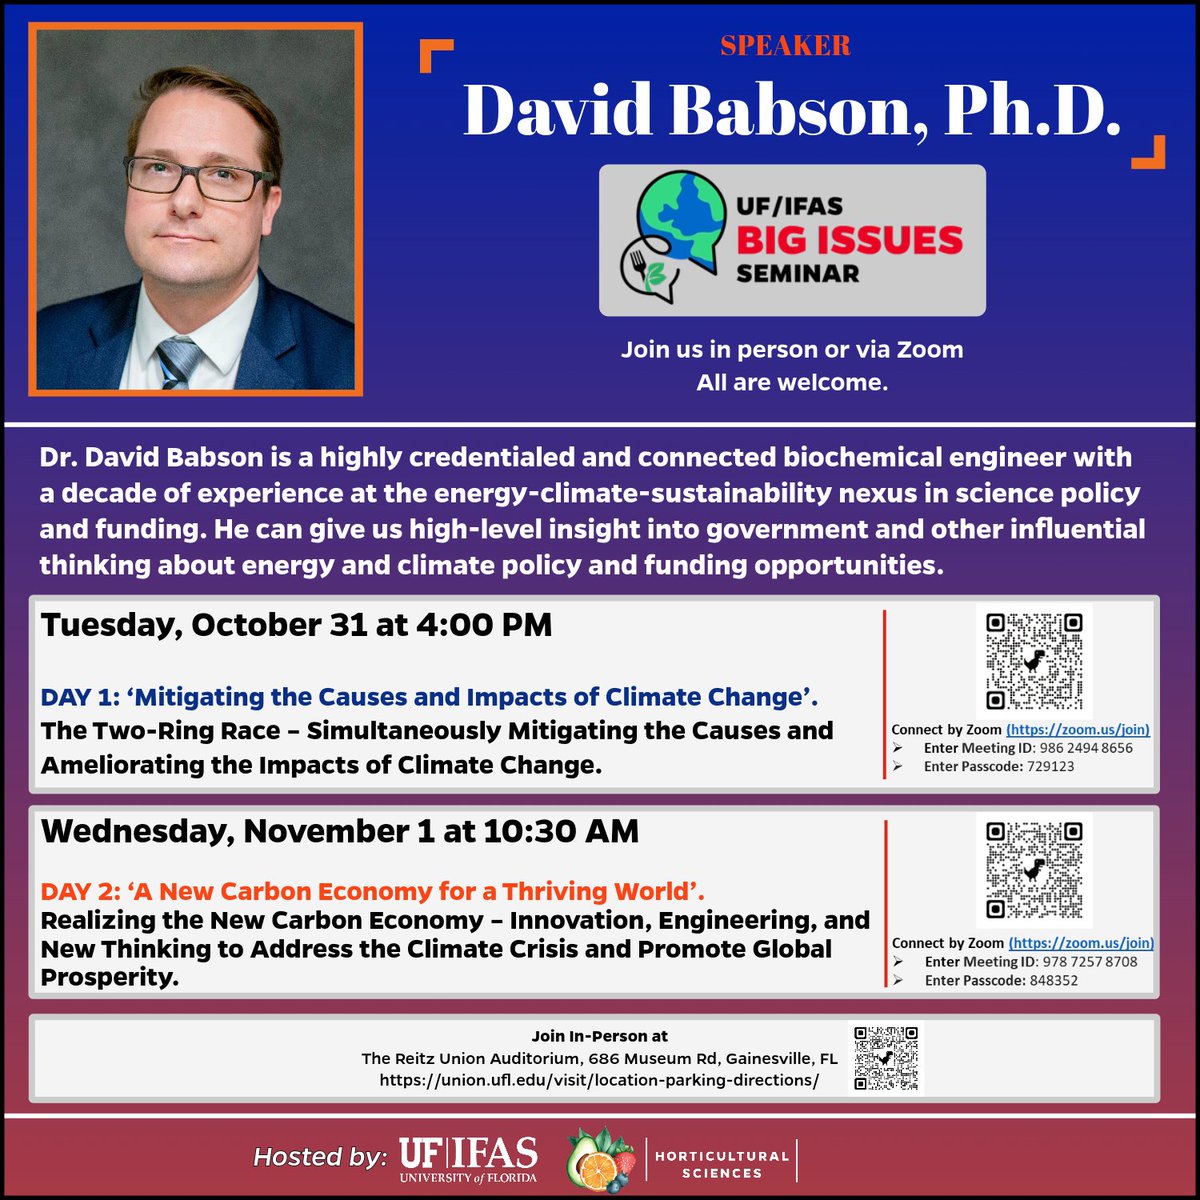 Big Issues Seminar! #UFIFAS Join us in person or via Zoom. Click the link below for details! hos.ifas.ufl.edu/advertisement/…